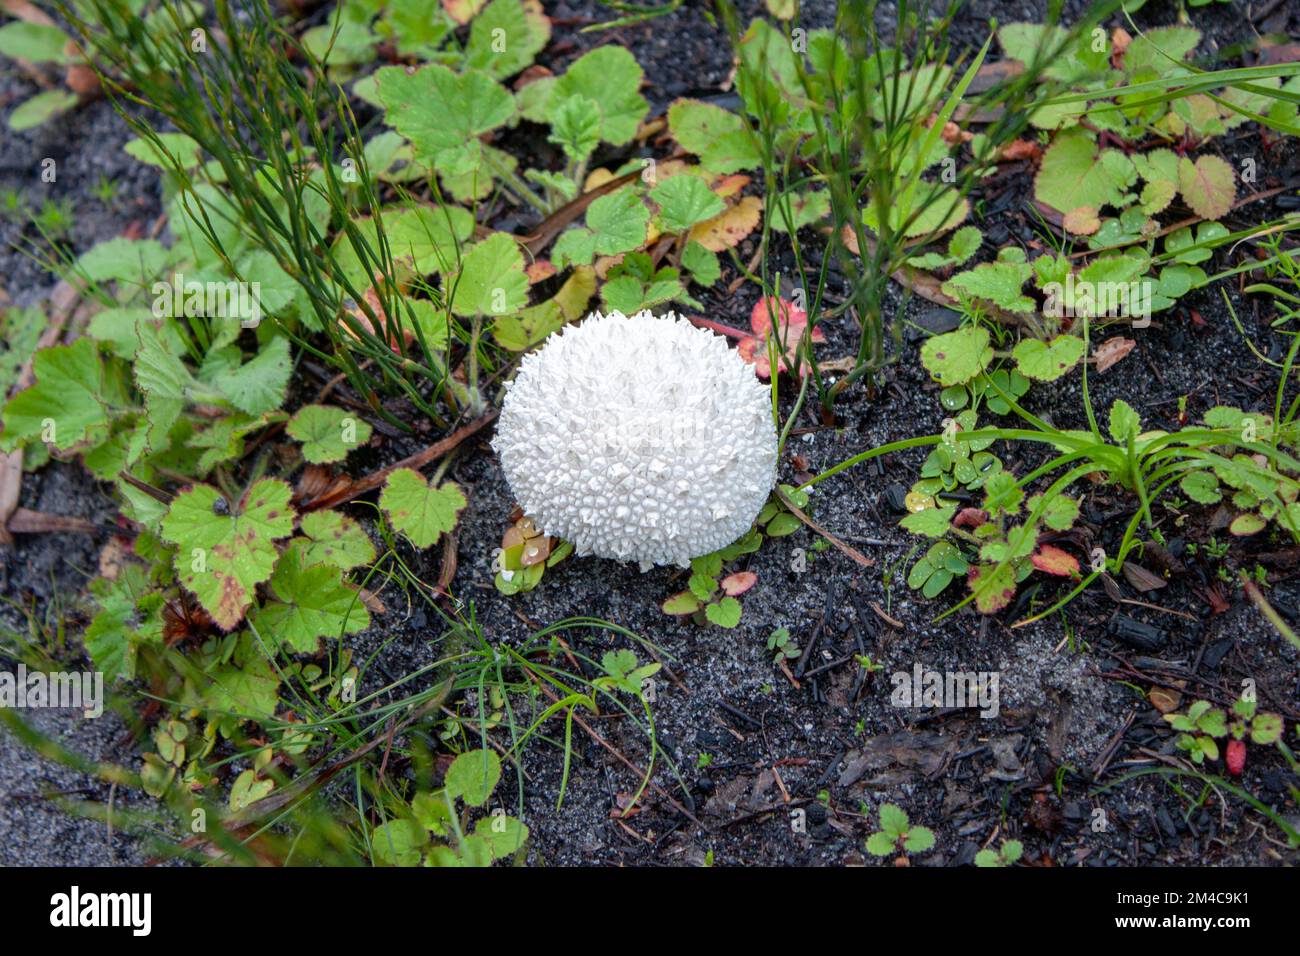 A closeup shot of a peeling puffball mushroom, Lycoperdon marginatum, on a wet ground among grass, in the forest Stock Photo